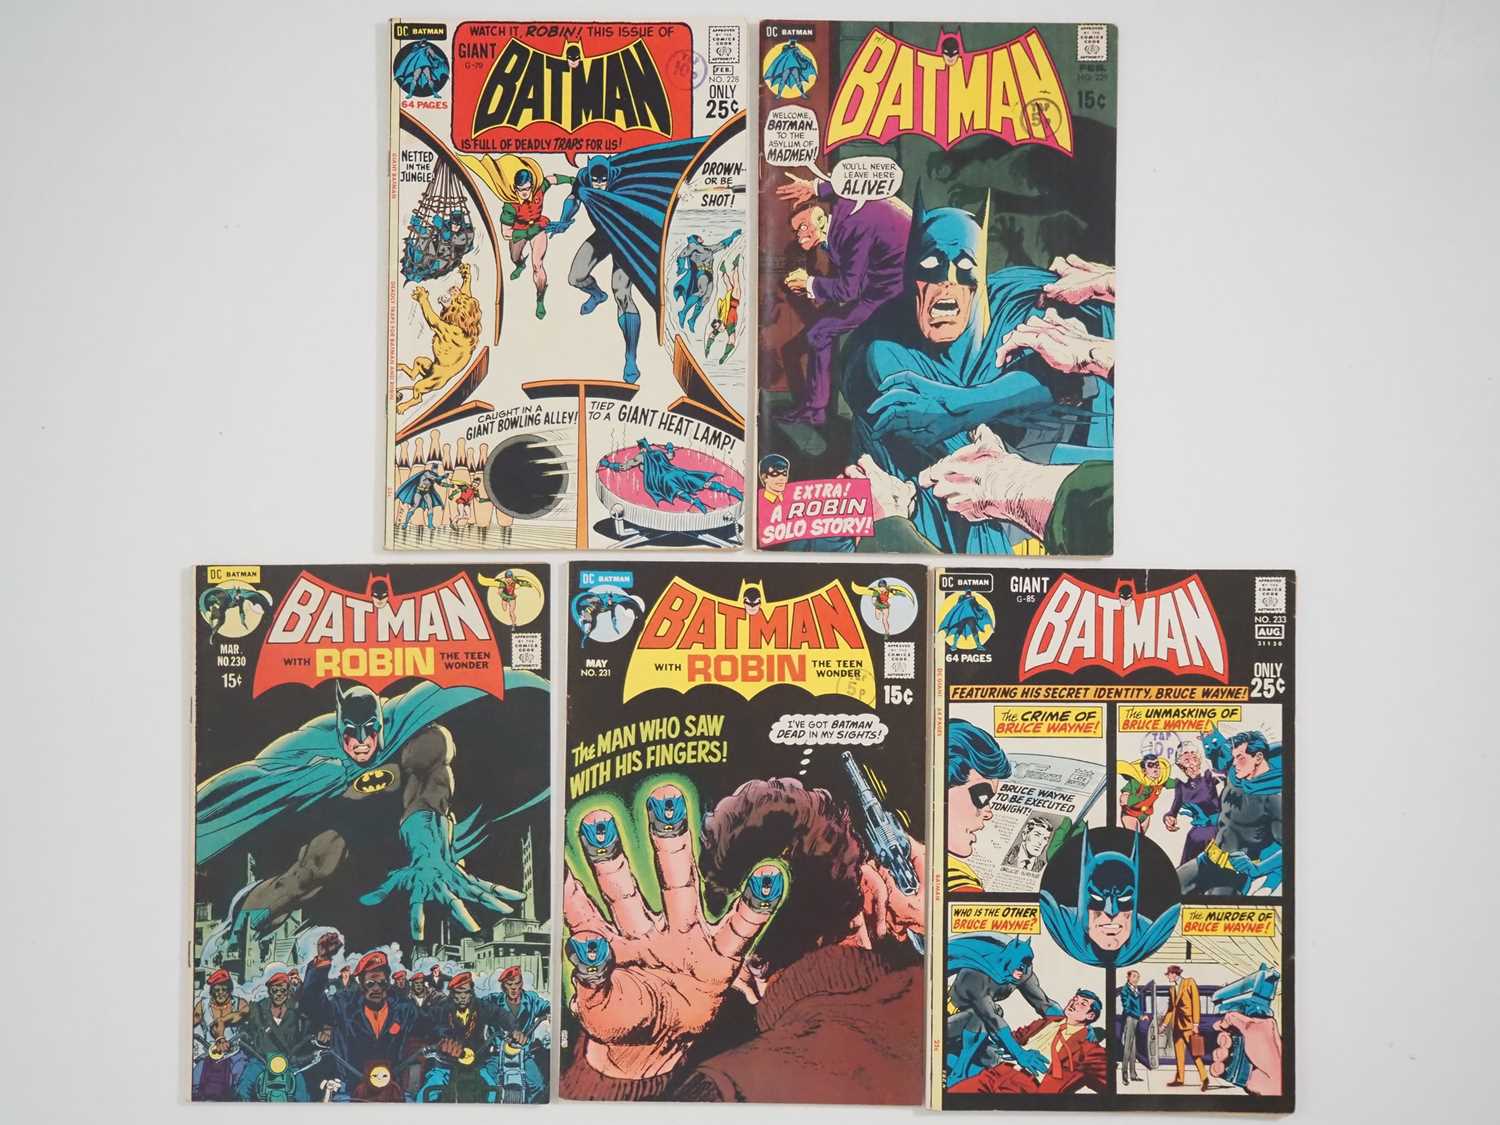 BATMAN #228, 229, 230, 231, 233 (5 in Lot) - (1971 - DC) - Includes an appearance by the Ten-Eyed